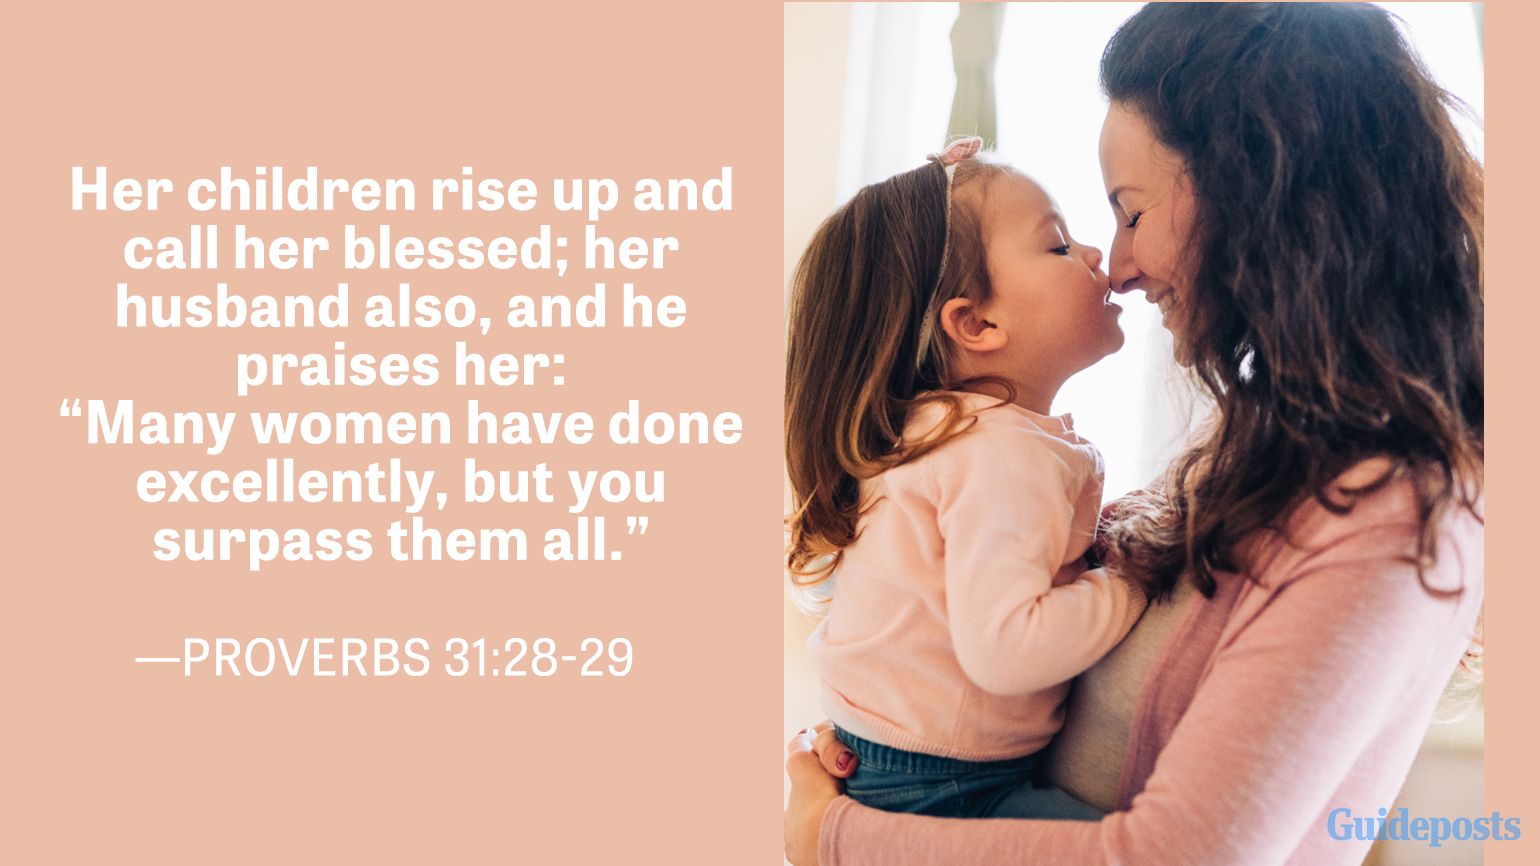 Her children rise up and call her blessed; her husband also, and he praises her: “Many women have done excellently, but you surpass them all.”  —Proverbs 31:28-29